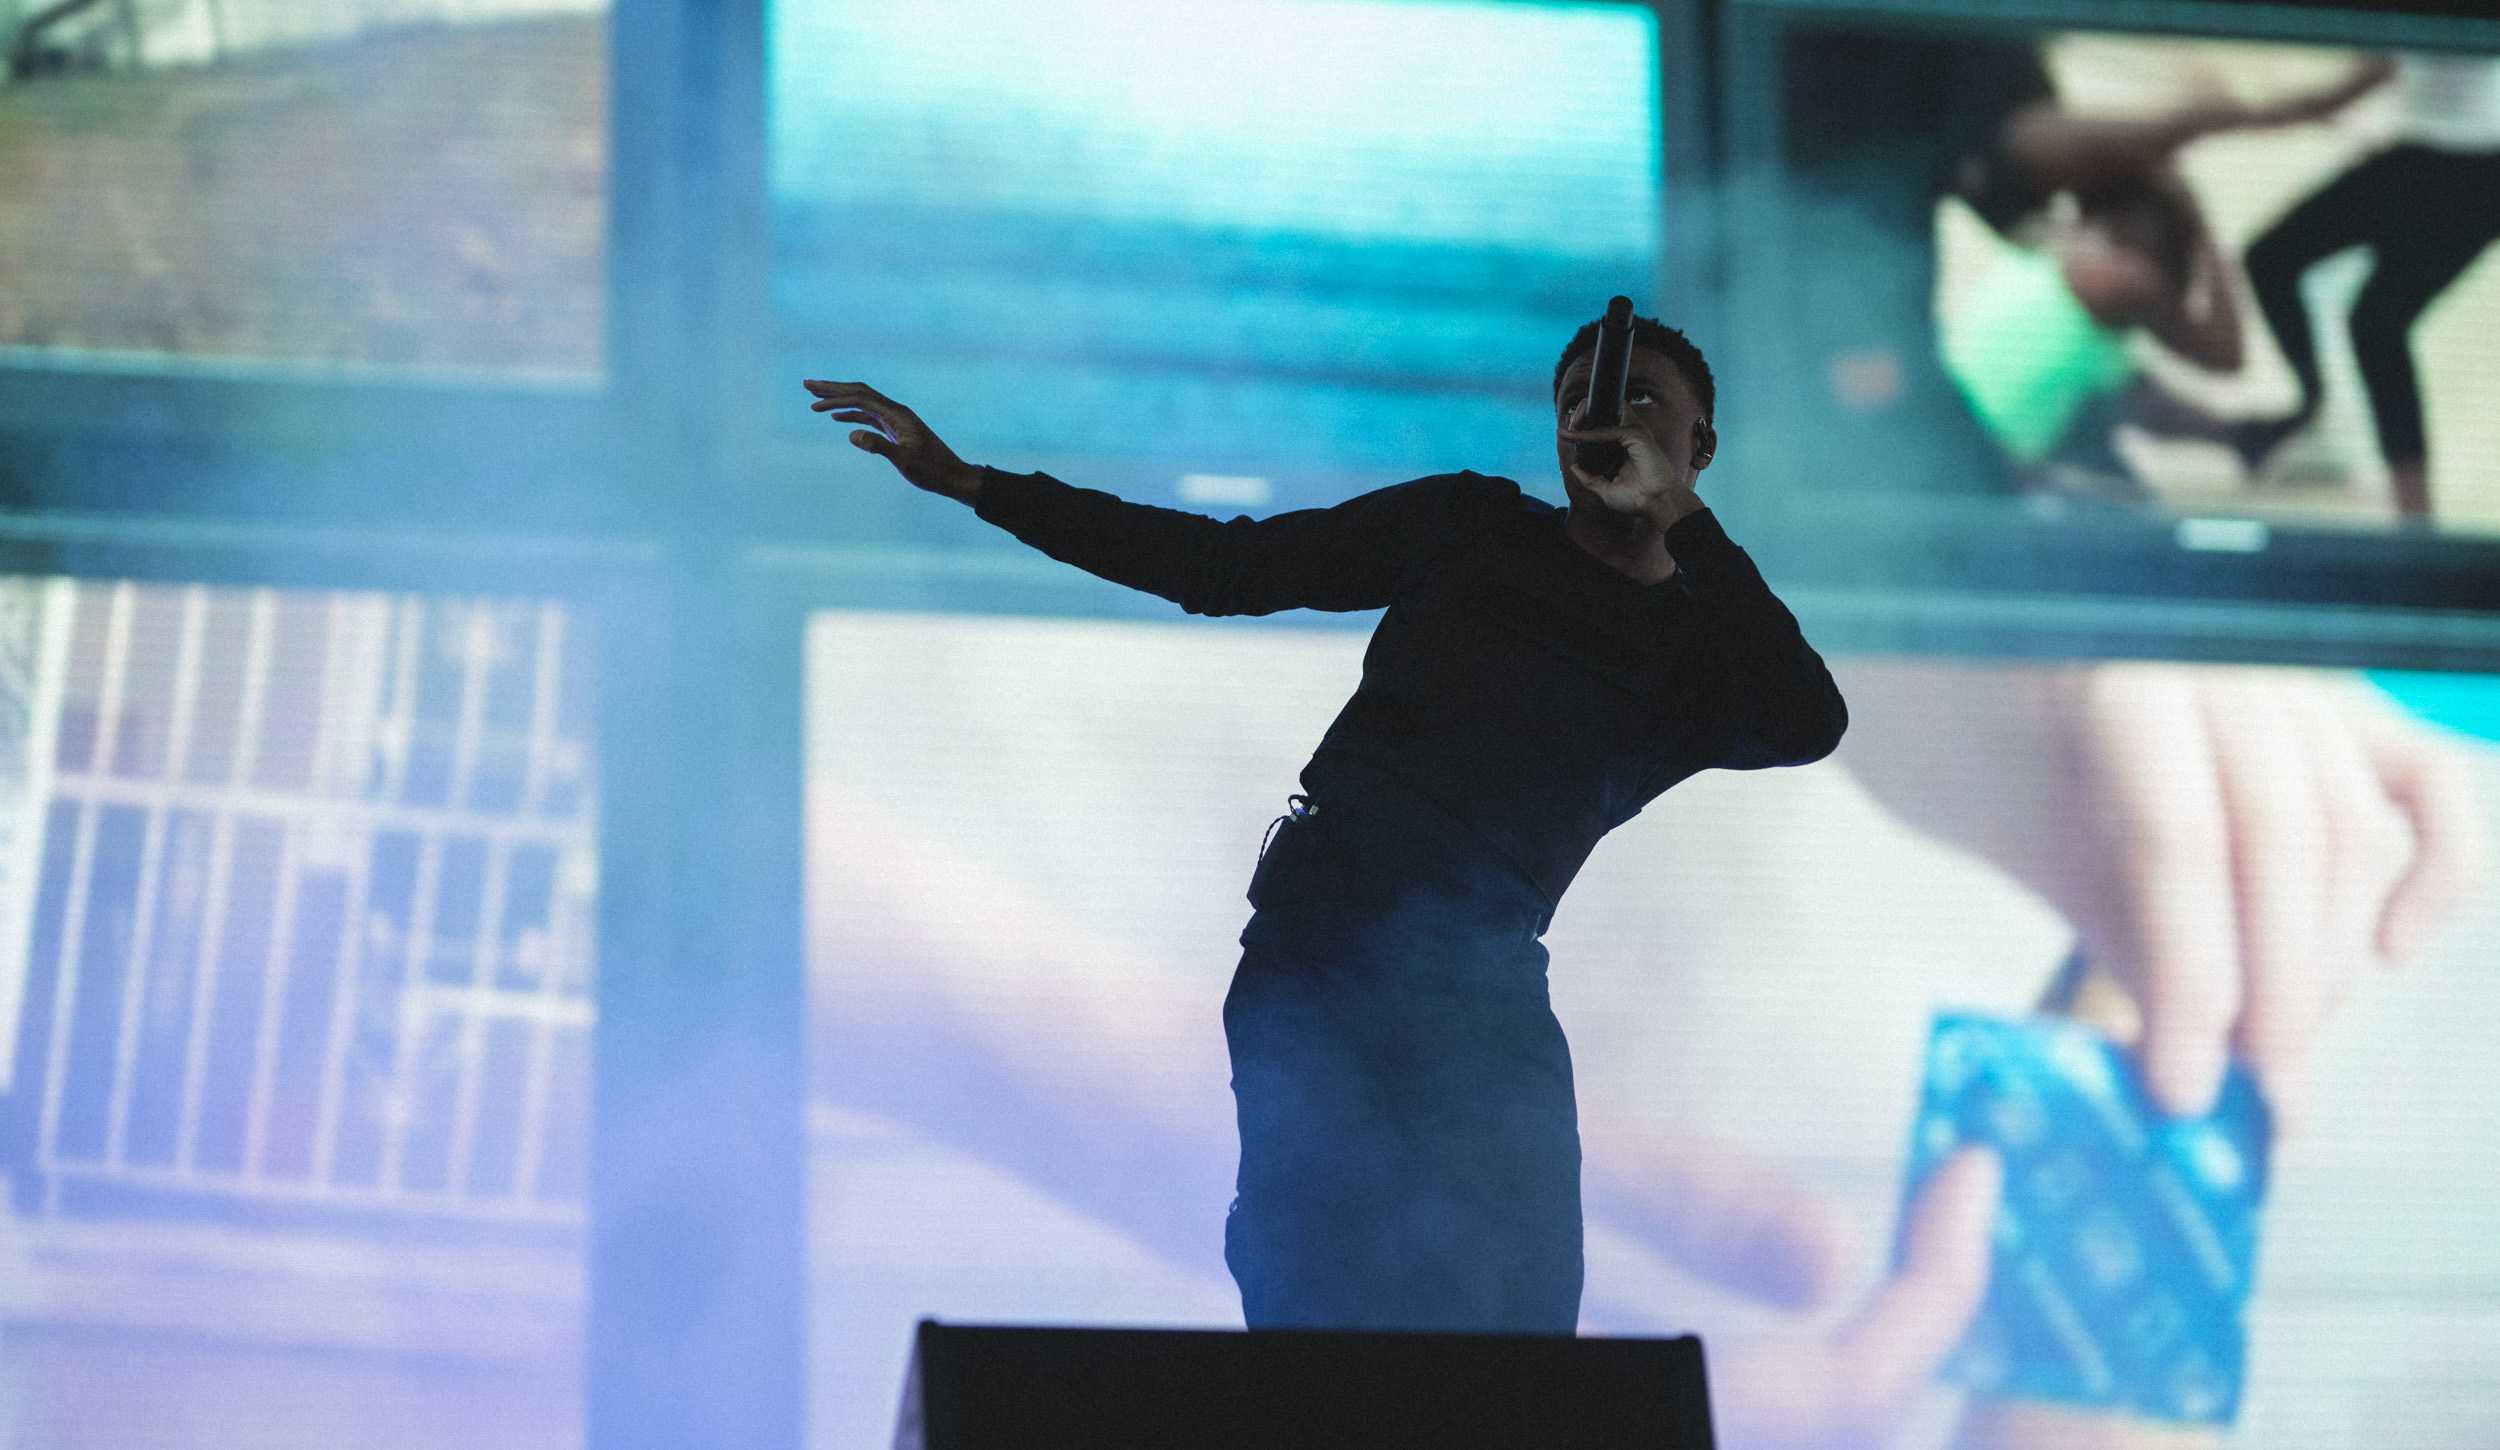 Vince Staples at Coachella 2018 - photographed with a Sony a7R III - Sigma 85mm f/1.4 Art - Sigma MC‑11 Mount Converter